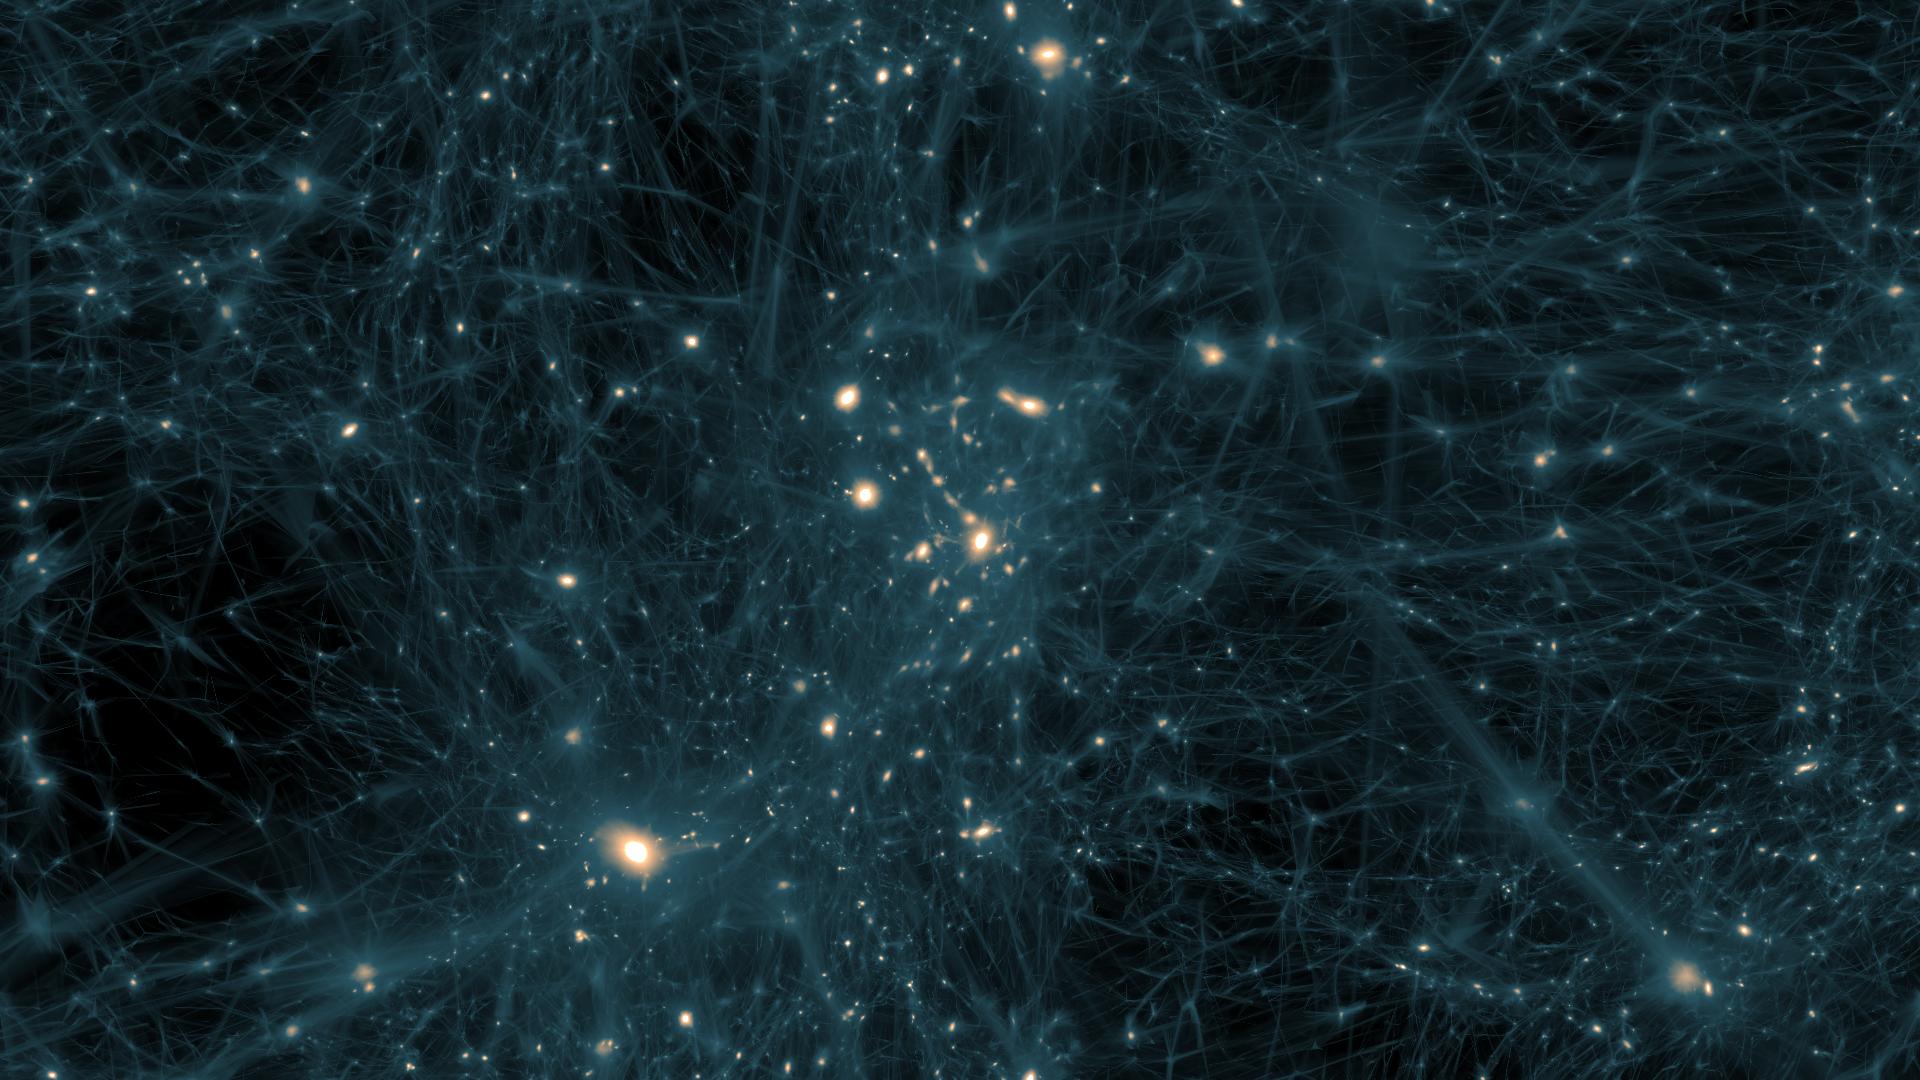 Preview Image for Fermi Observations of Dwarf Galaxies Provide New Insights on Dark Matter